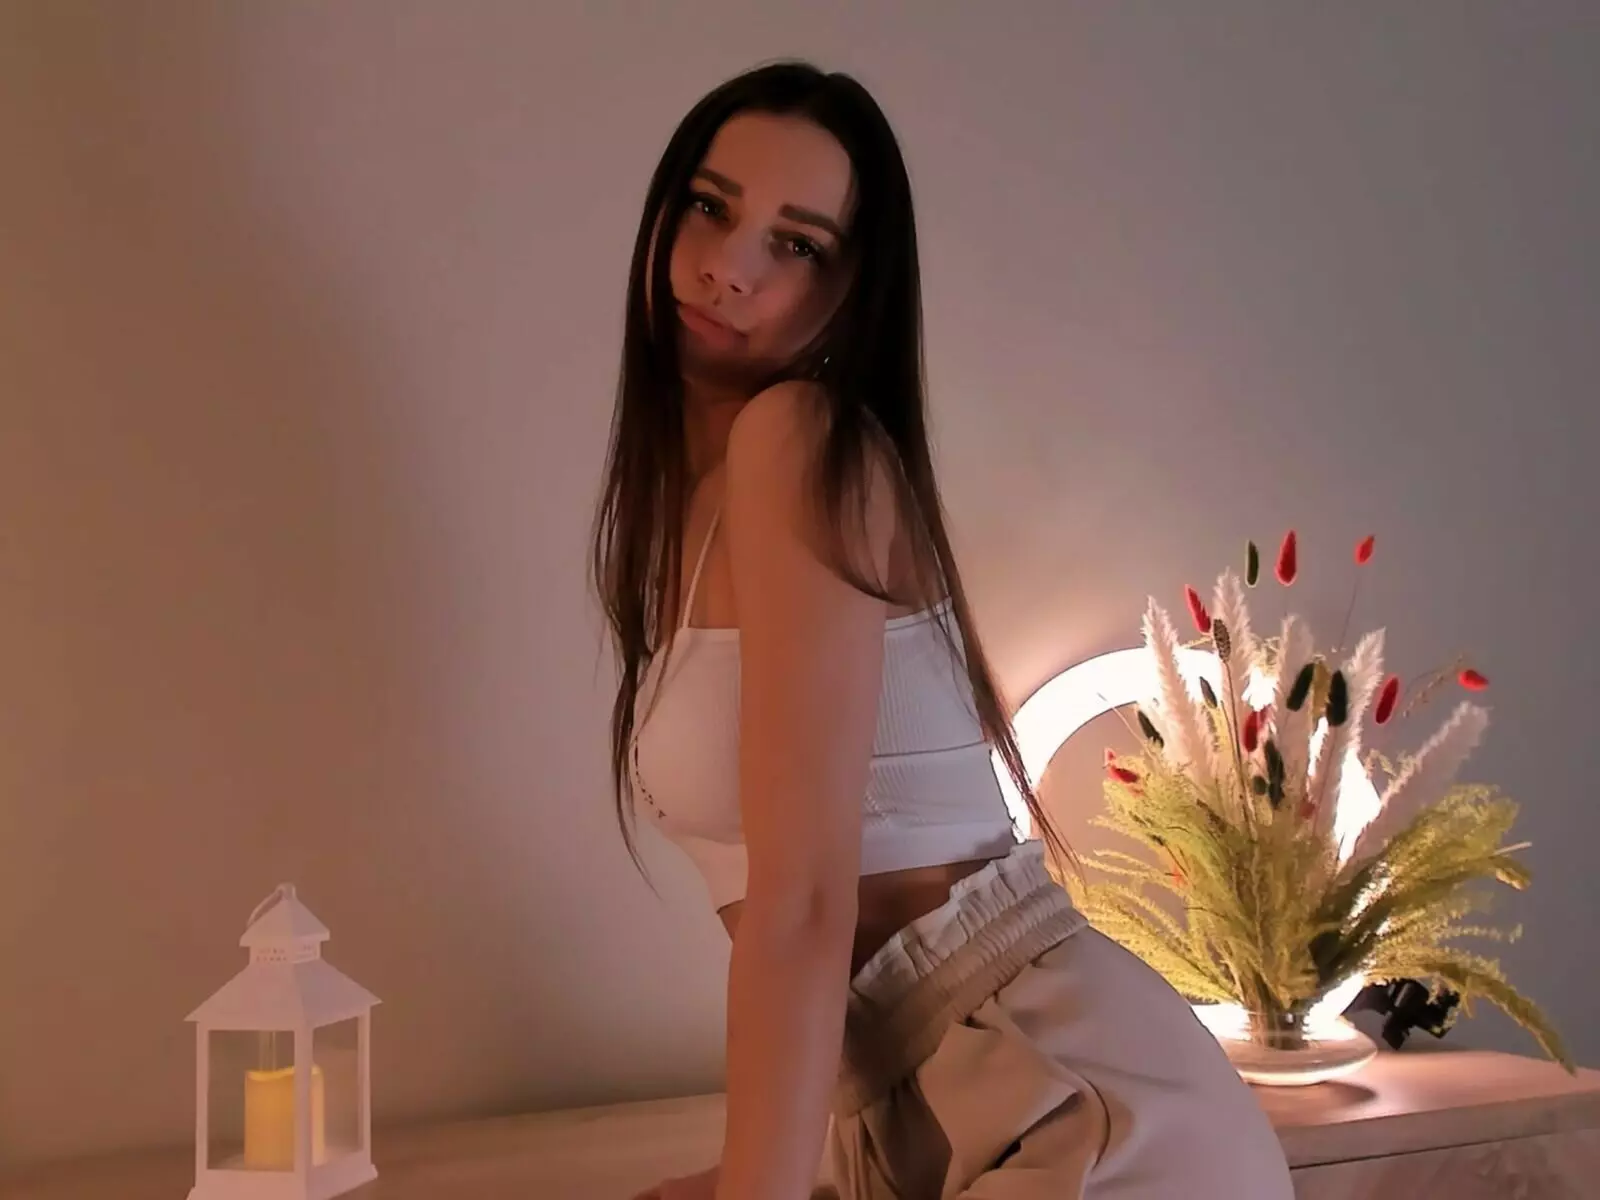 View more of ClaireYammy